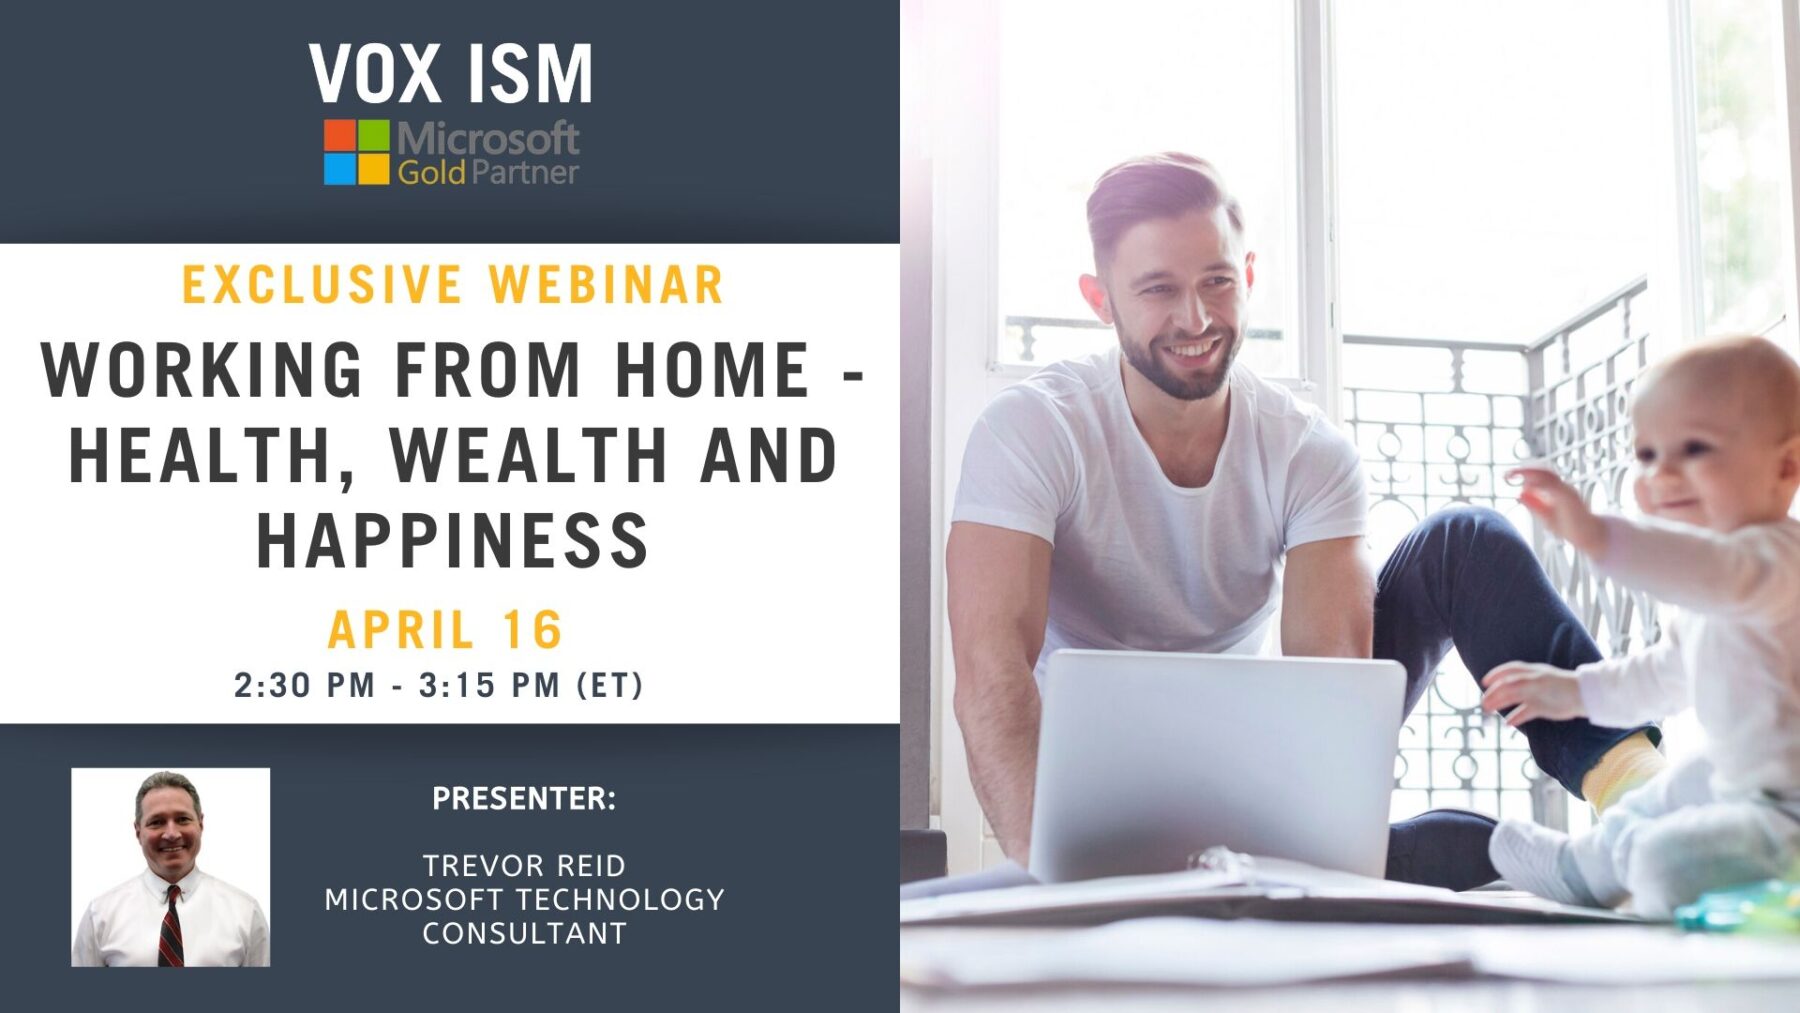 Working from Home - Health, Wealth and Happiness - April 16 - Webinar_VOX ISM